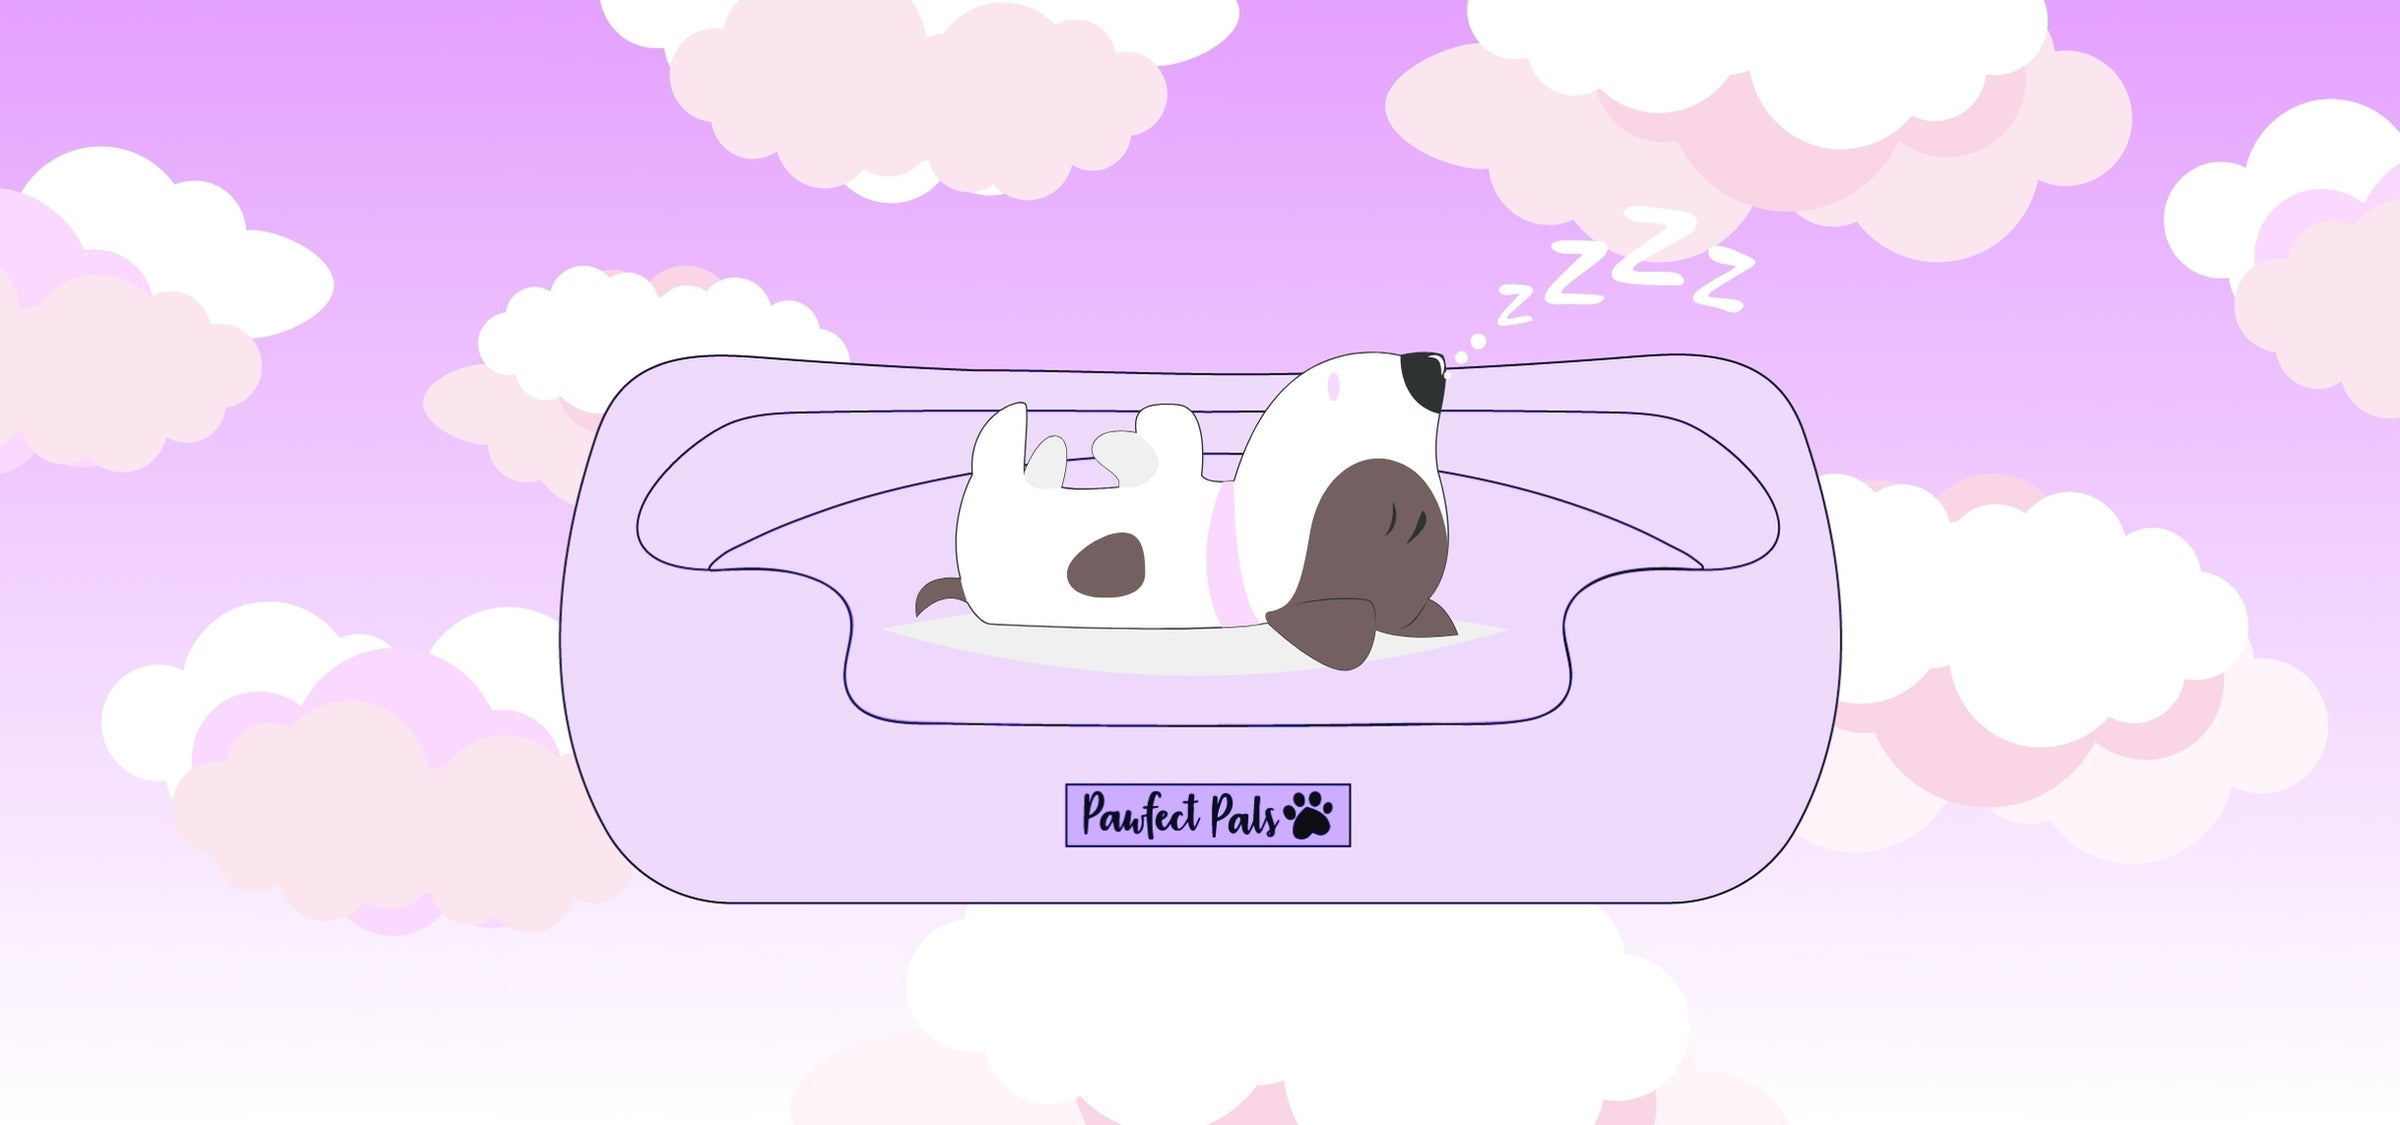 An illustration of a dog sleeping happily on a Pawfect Pals Snuggle Bud dog bed.